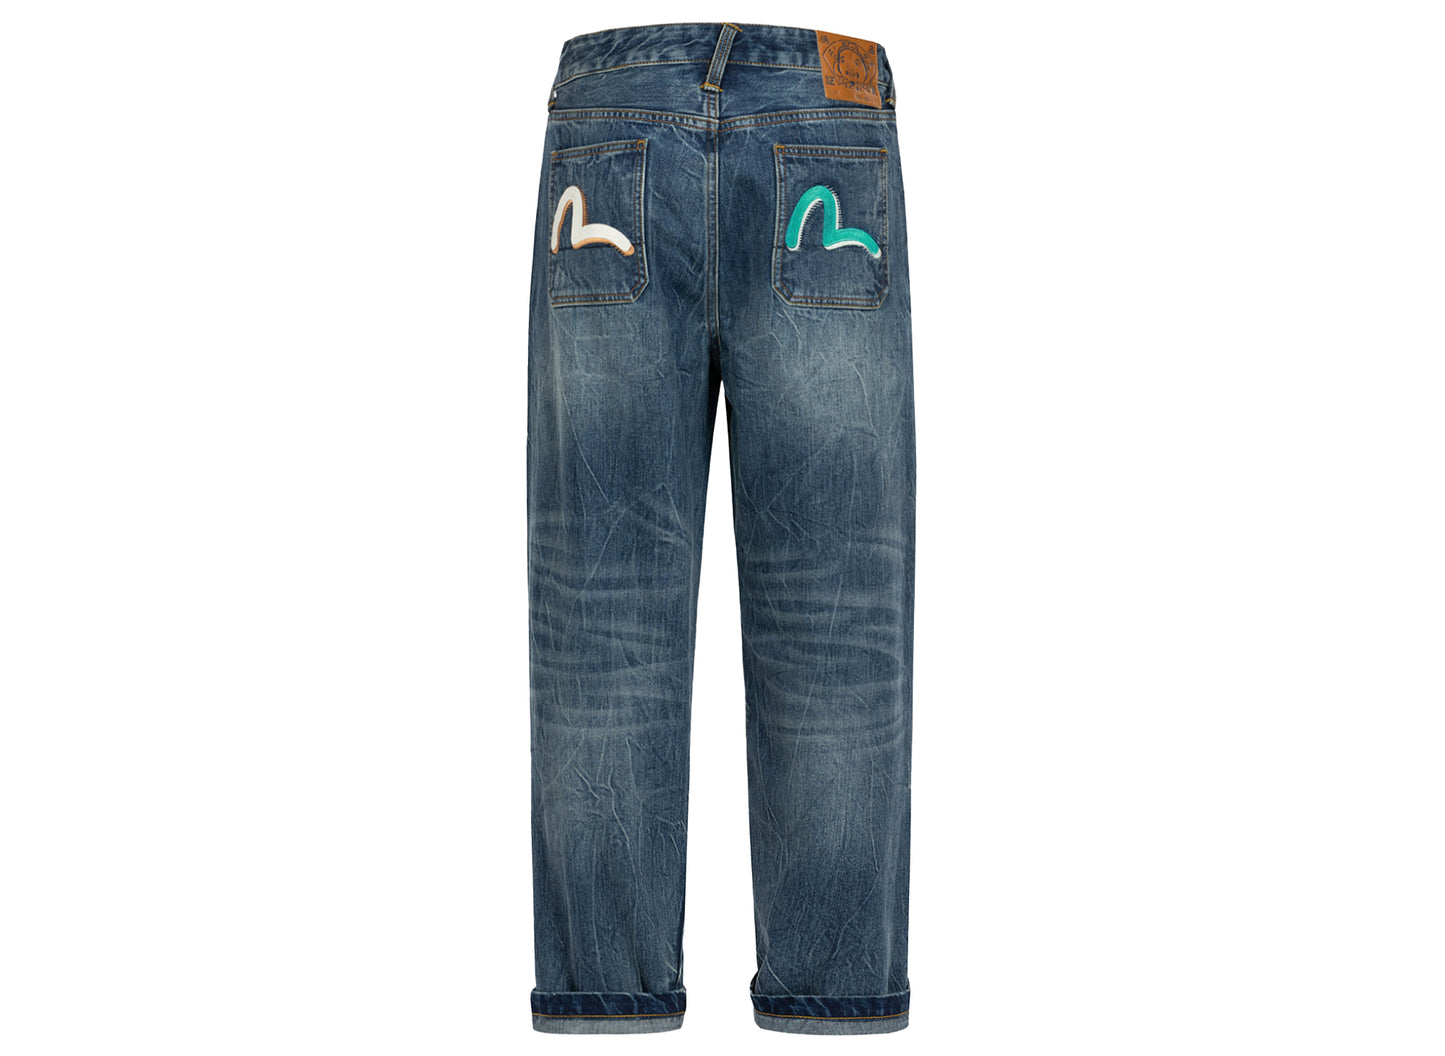 Evisu Seagull Printed and Embroidered Relax Fit Jeans xld